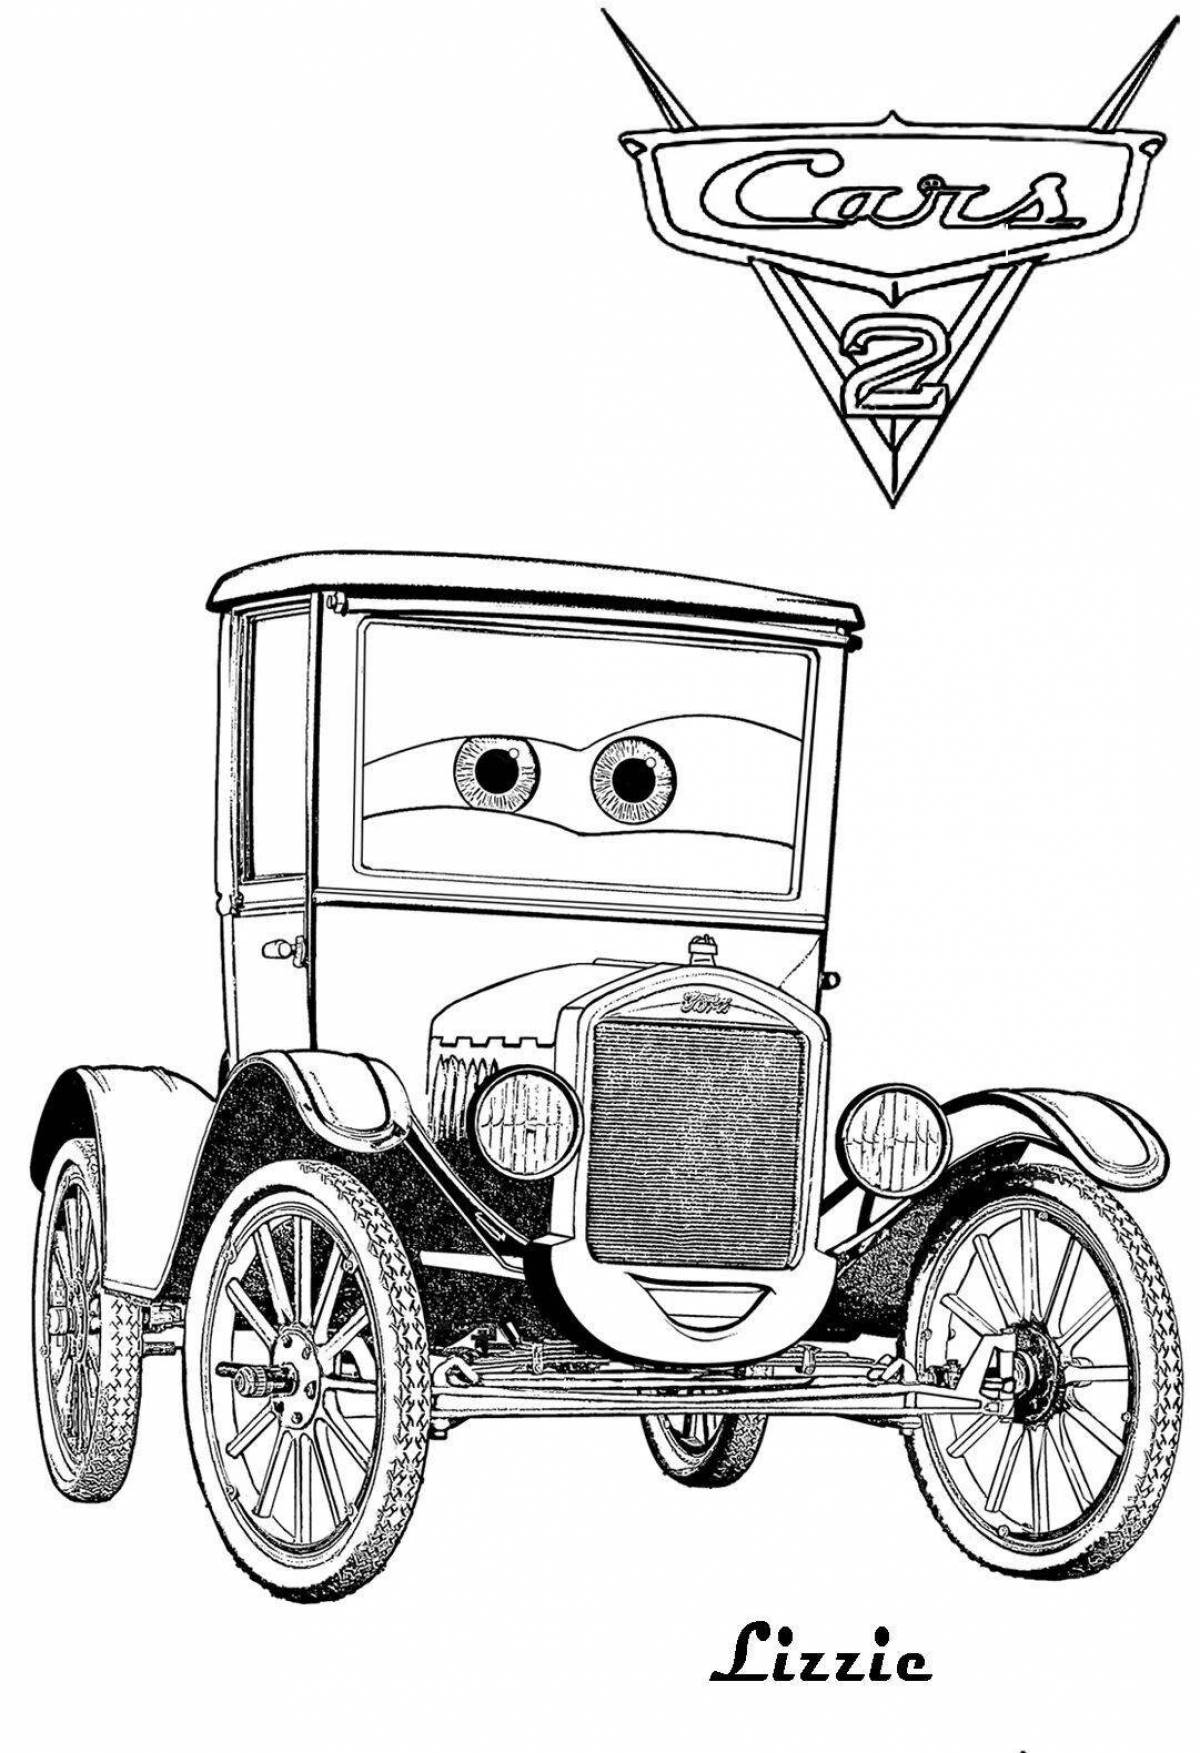 Charming frank cars coloring book